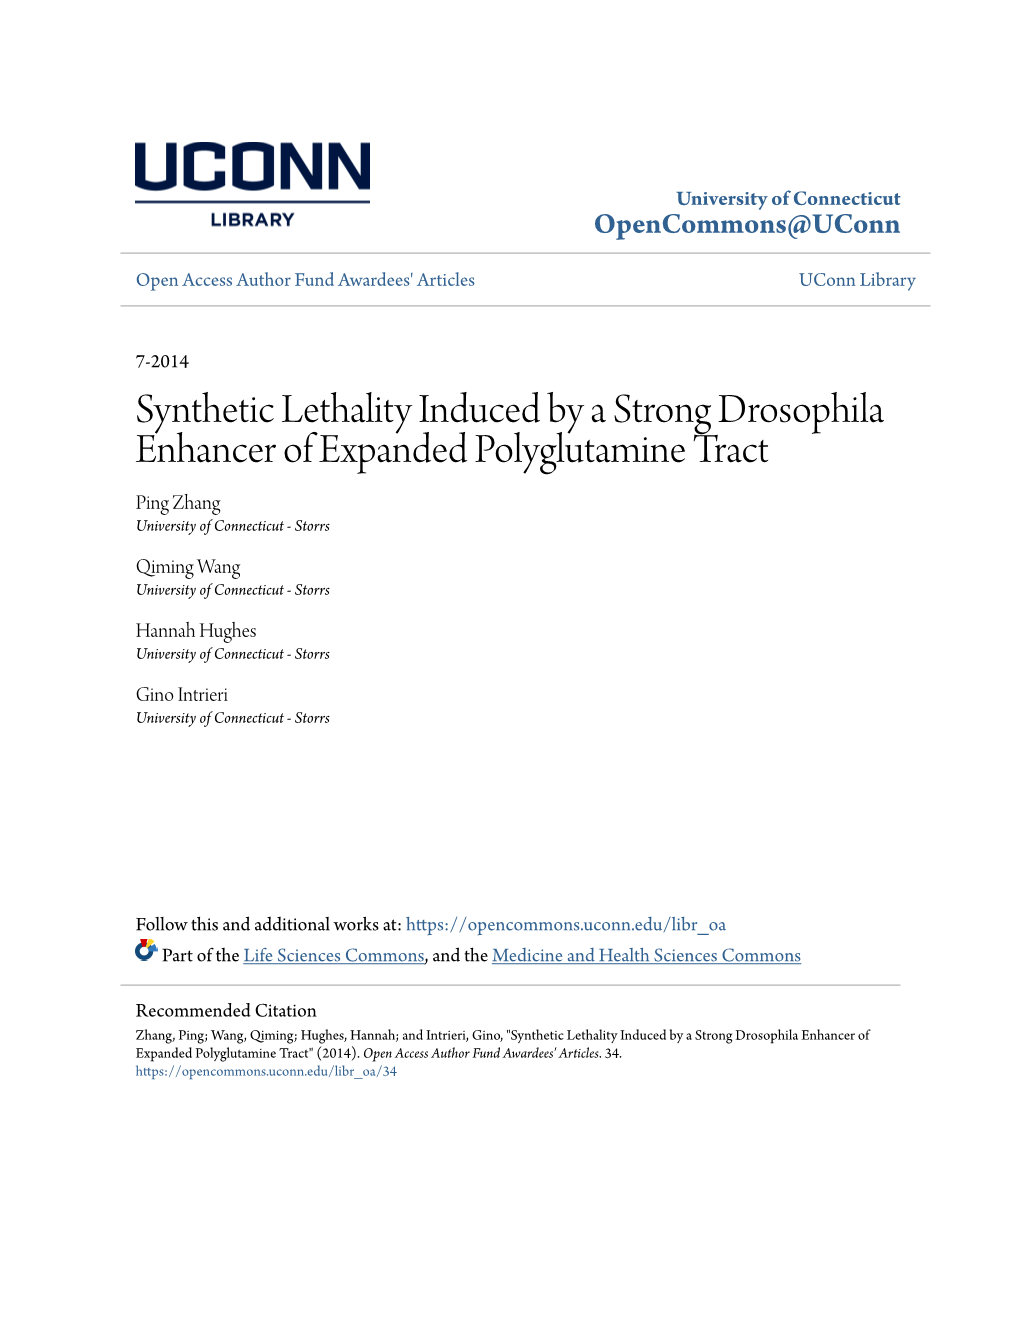 Synthetic Lethality Induced by a Strong Drosophila Enhancer of Expanded Polyglutamine Tract Ping Zhang University of Connecticut - Storrs